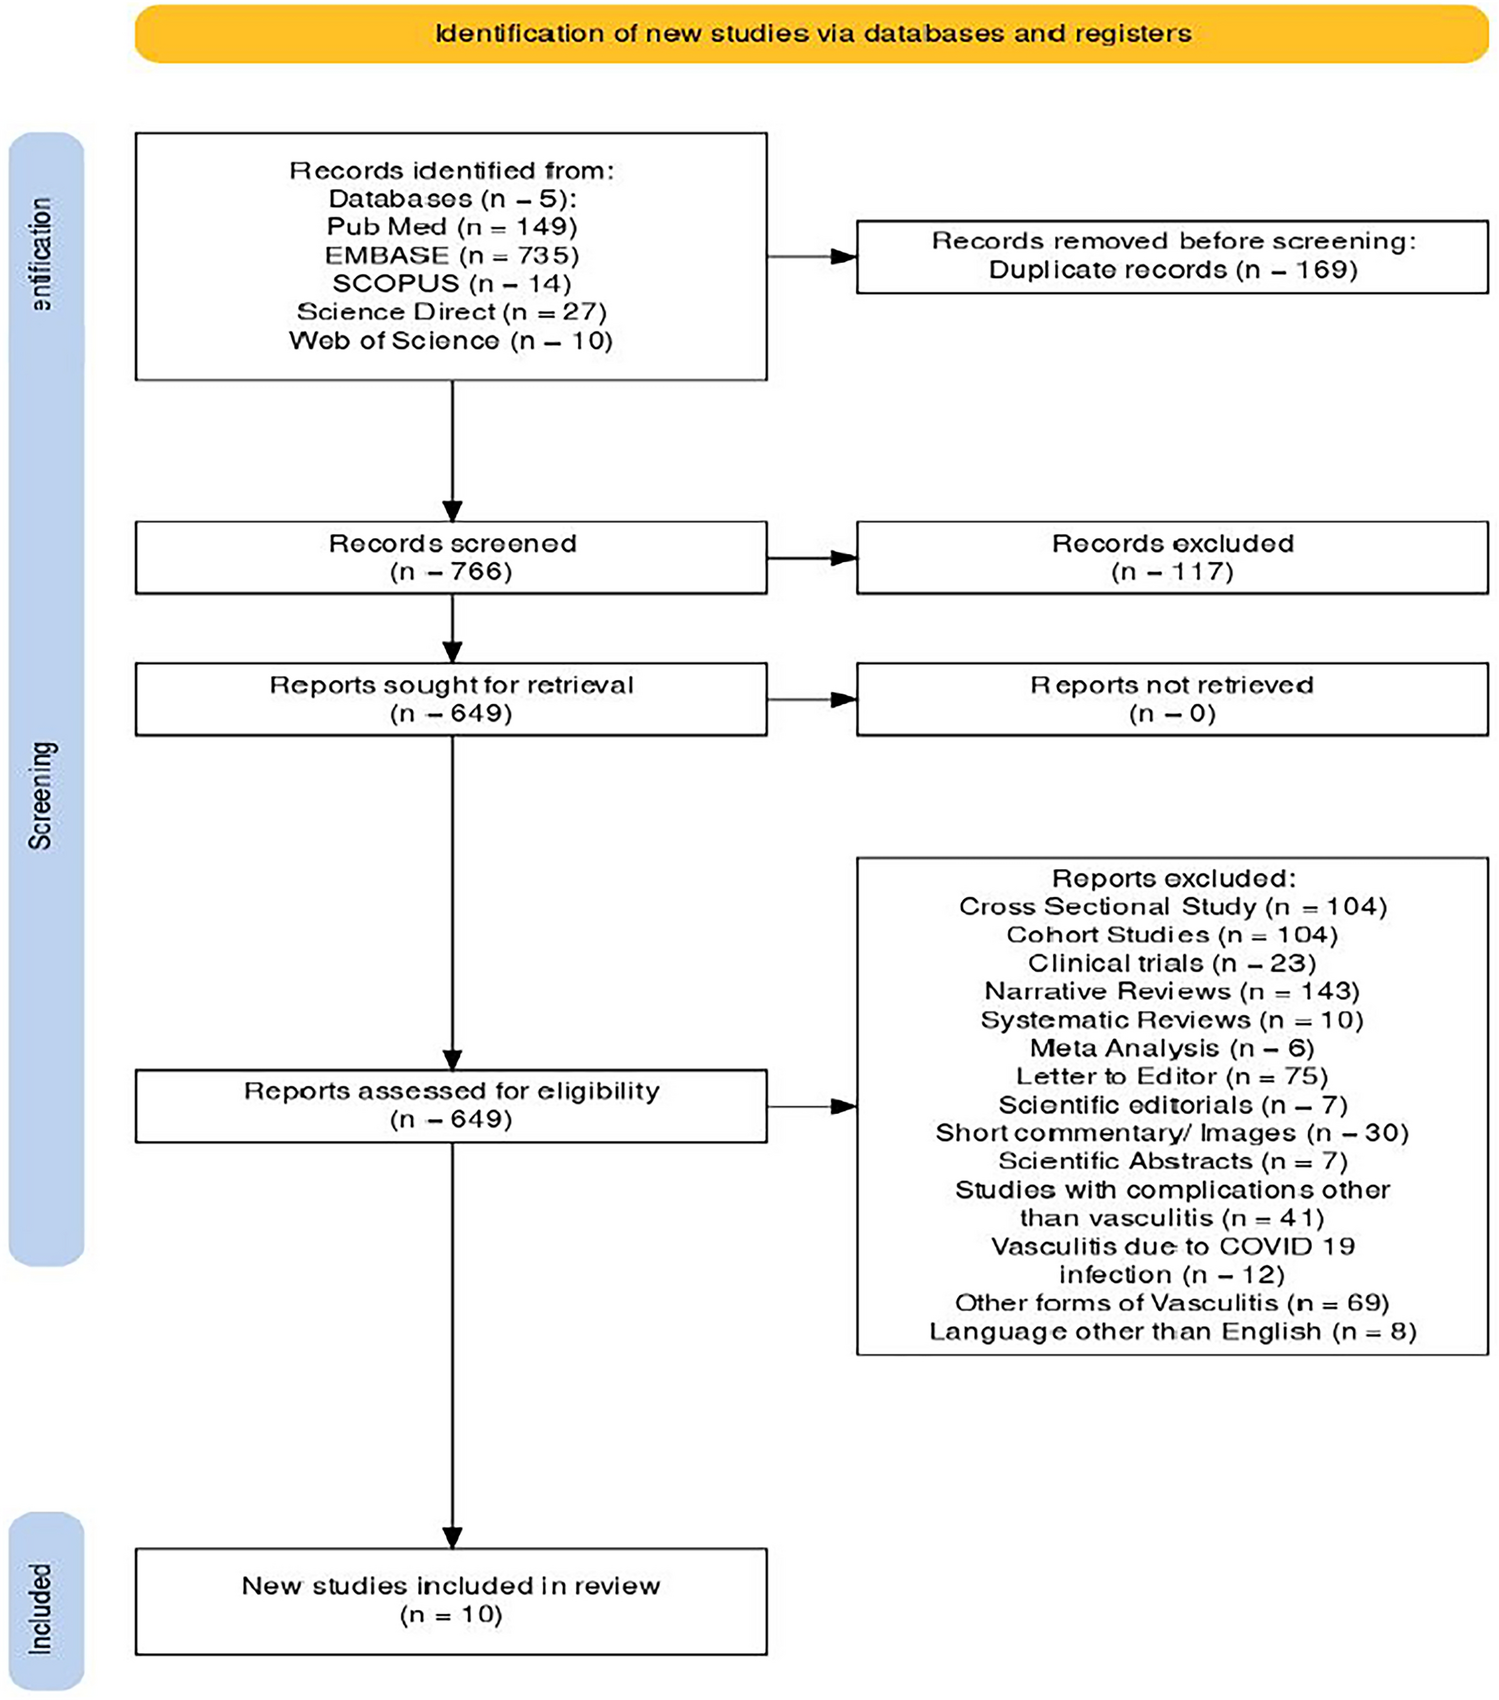 Post COVID-19 vaccination medium vessel vasculitis: a systematic review of case reports